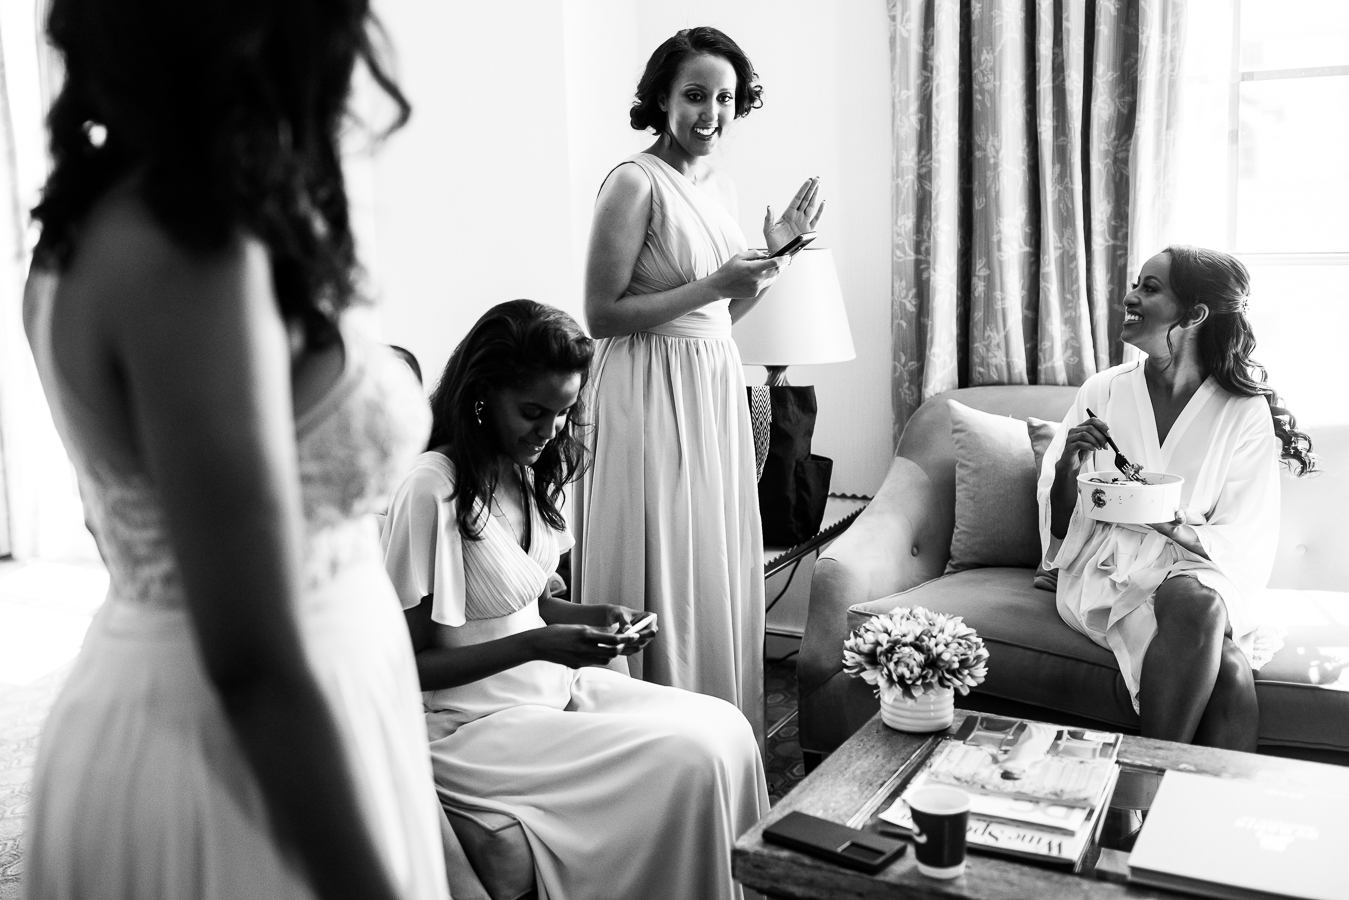 dc wedding photojournalist, Lisa Rhinehart, captures this black and white image of the Ethiopian bride and her bridesmaids as they get ready together at the st regis hotel inn Washington DC